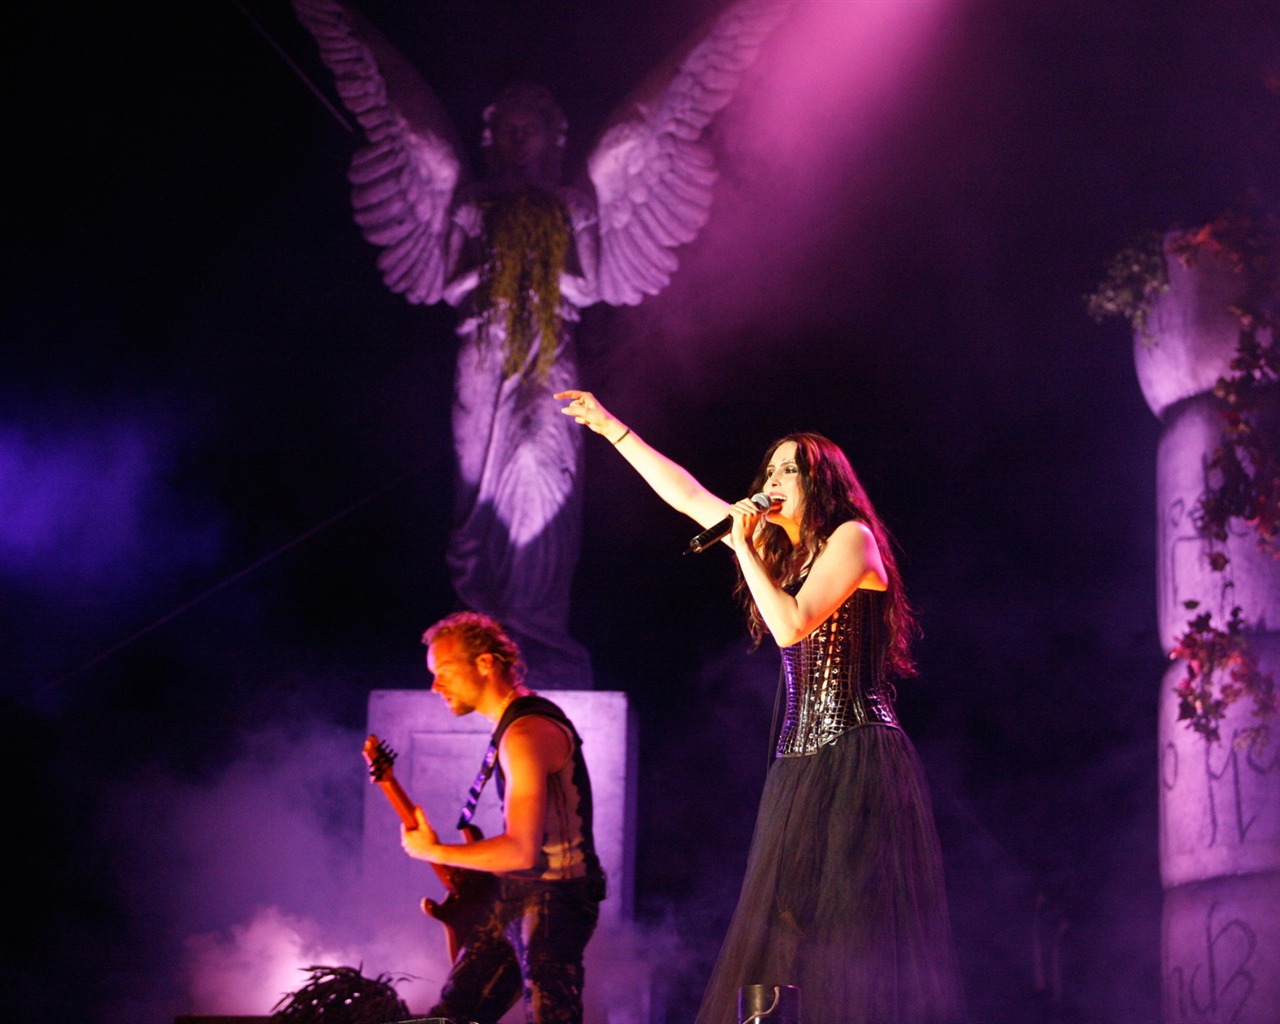 Sharon den Adel #014 - 1280x1024 Wallpapers Pictures Photos Images